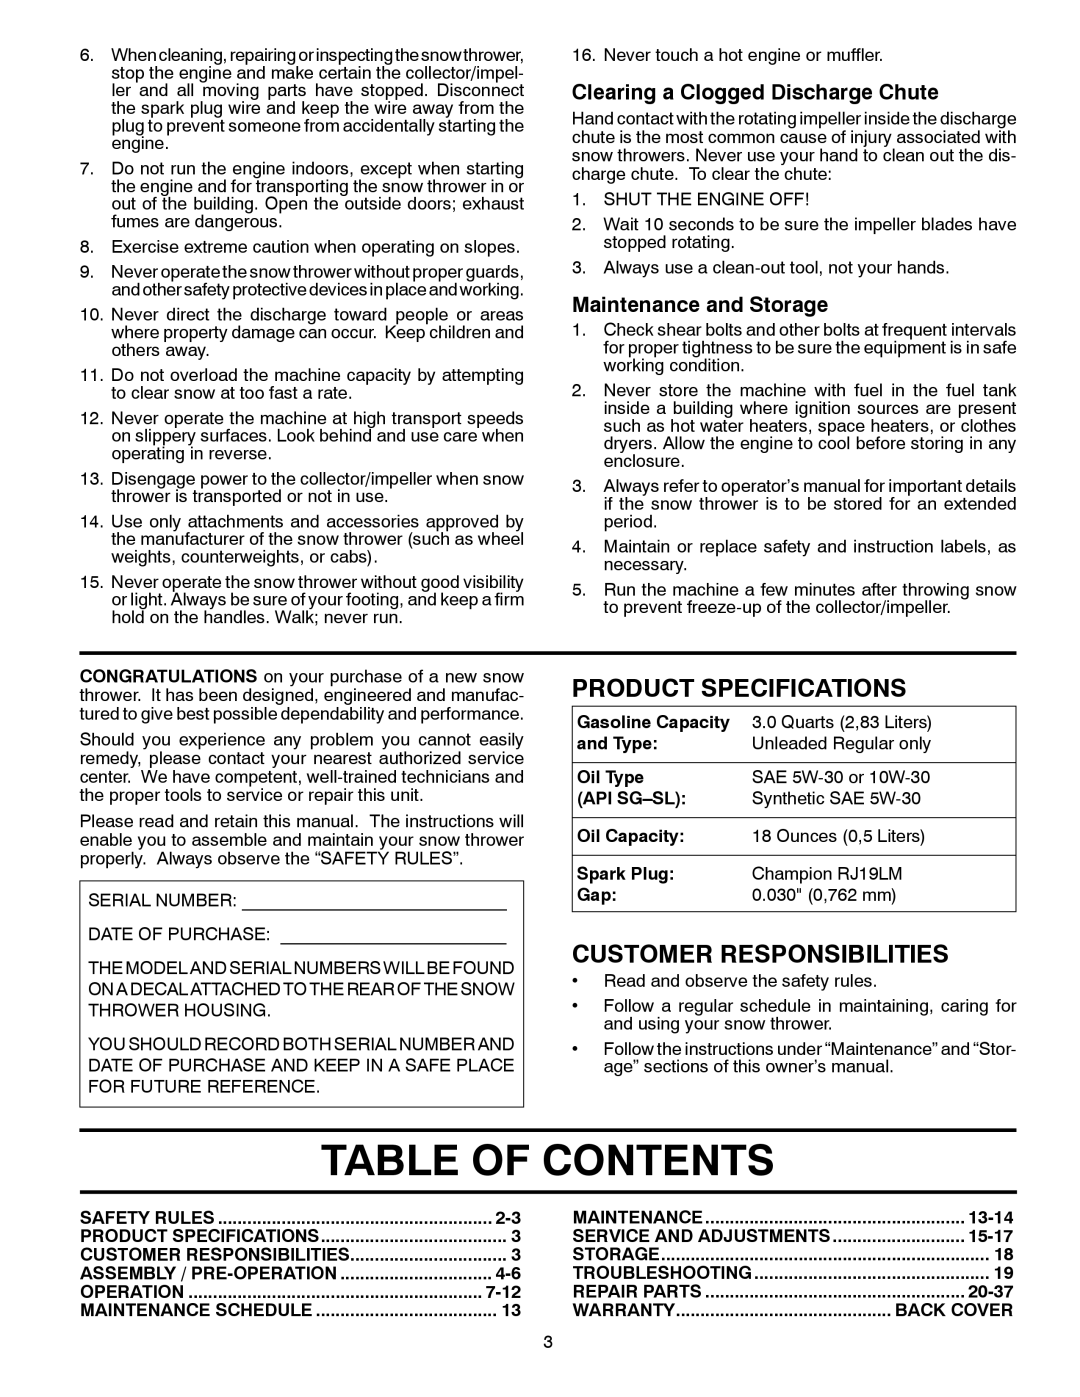 Poulan XT824ES Table Of Contents, Product Specifications, Customer Responsibilities, Clearing a Clogged Discharge Chute 